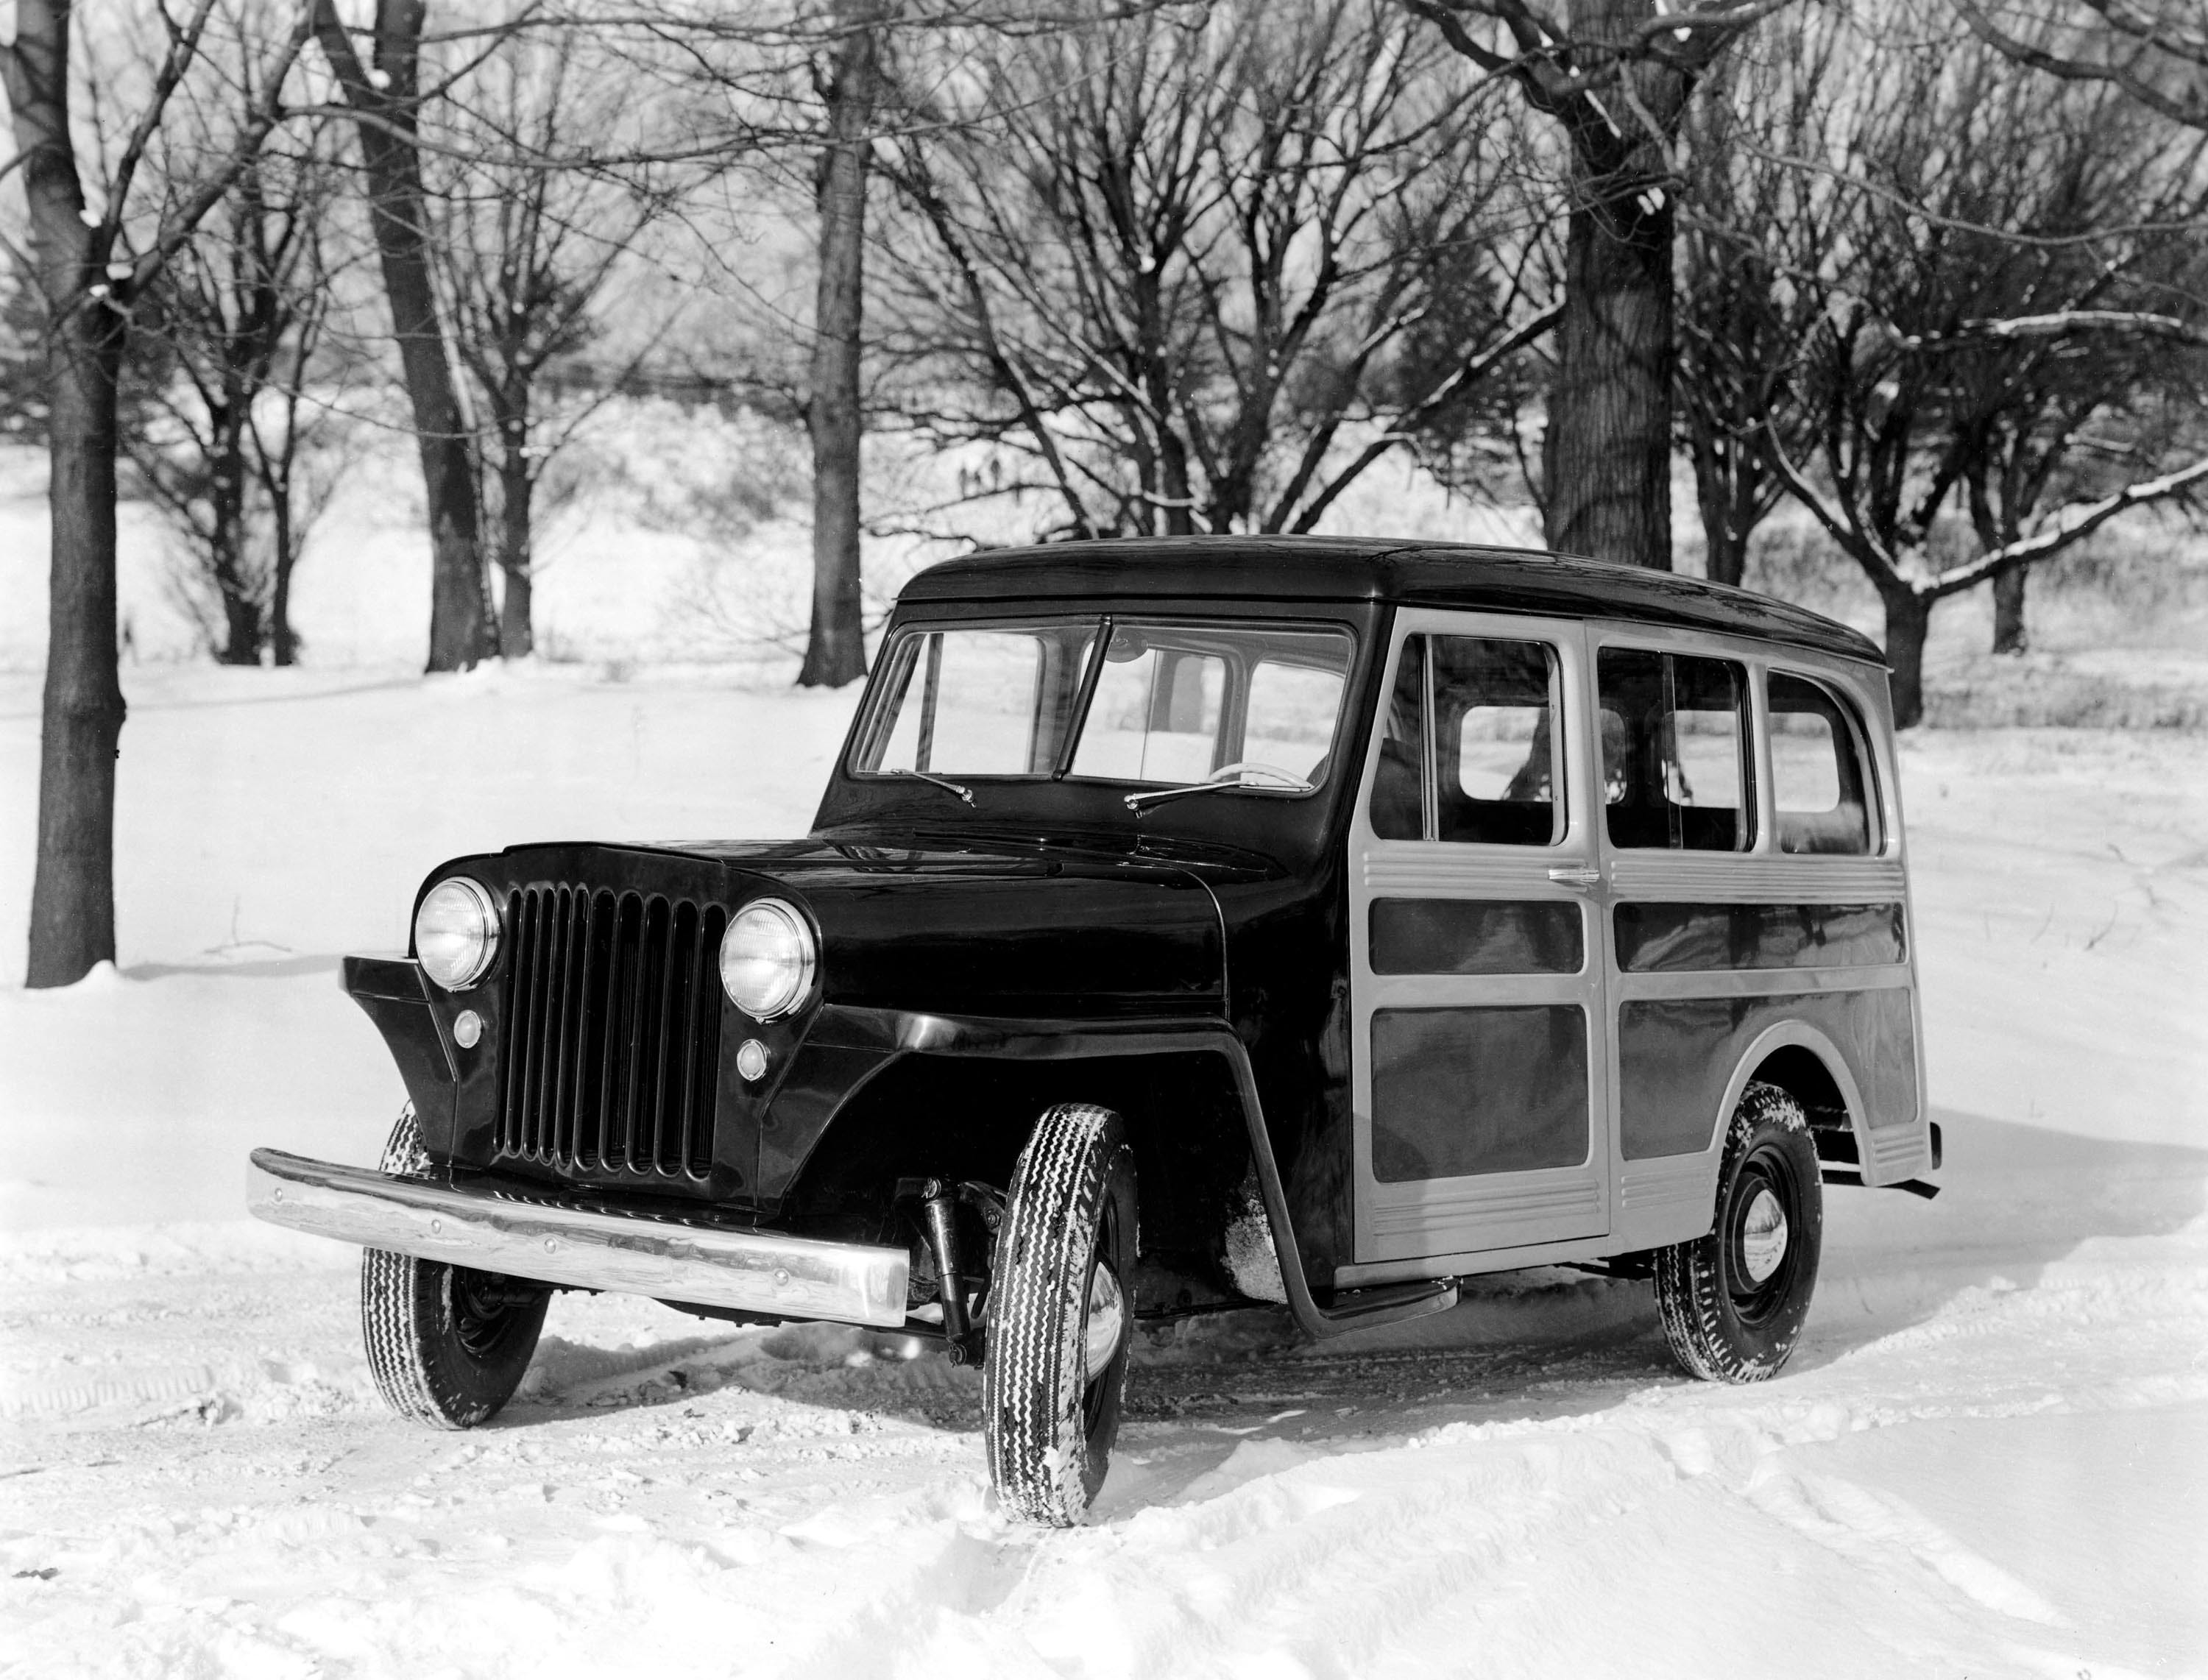 Combining a spacious interior with a low-maintenance exterior and four-wheel drive capability, the 1949 Jeep Station Wagon was America's first true sport-utility vehicle.